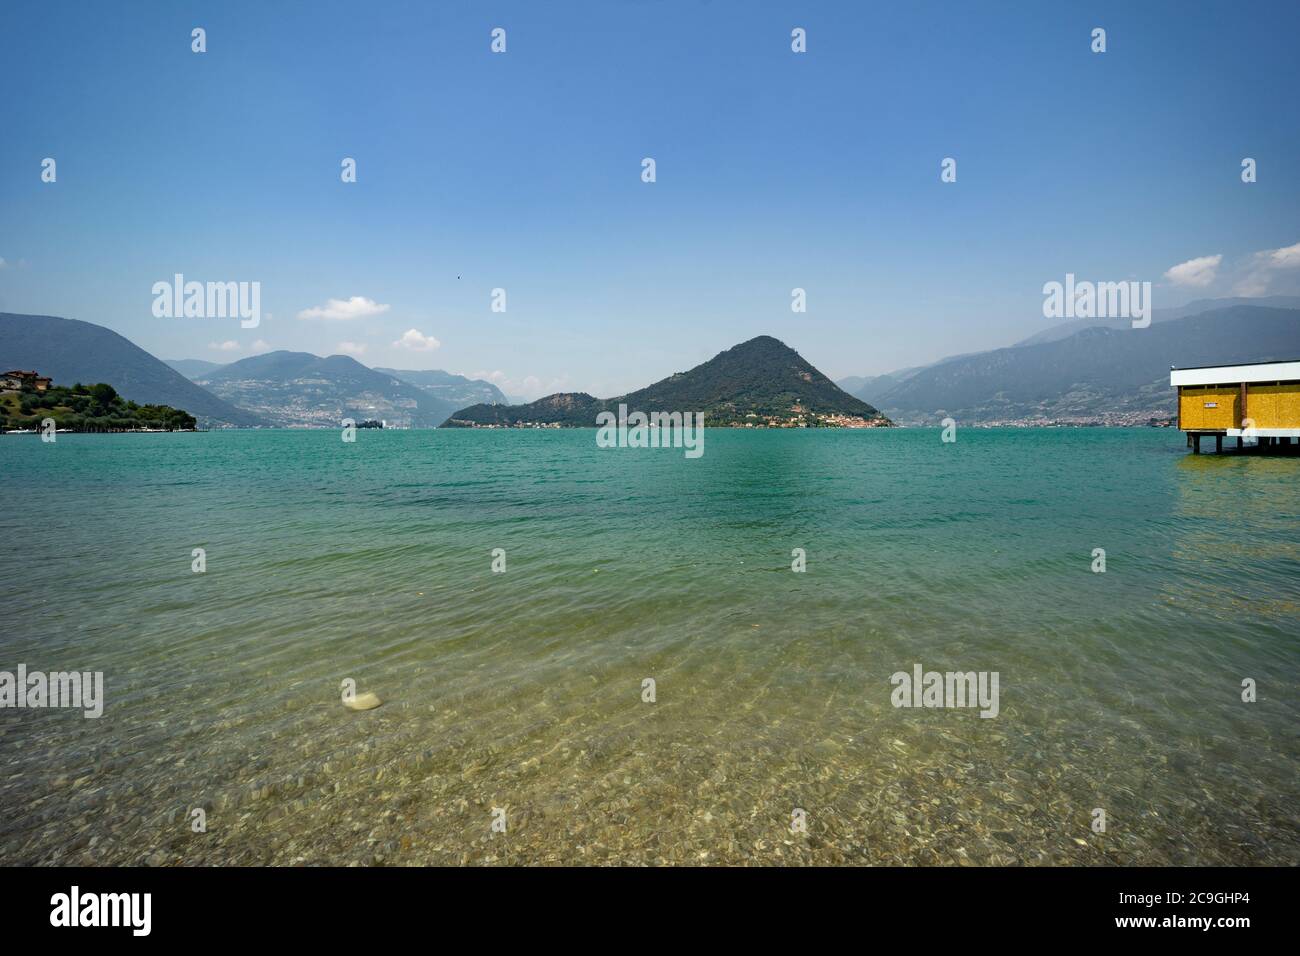 The Montisola island in the middle of Lake Iseo, Val Camonica, Lombardy, Italy, panoramic view from the shoreline Stock Photo